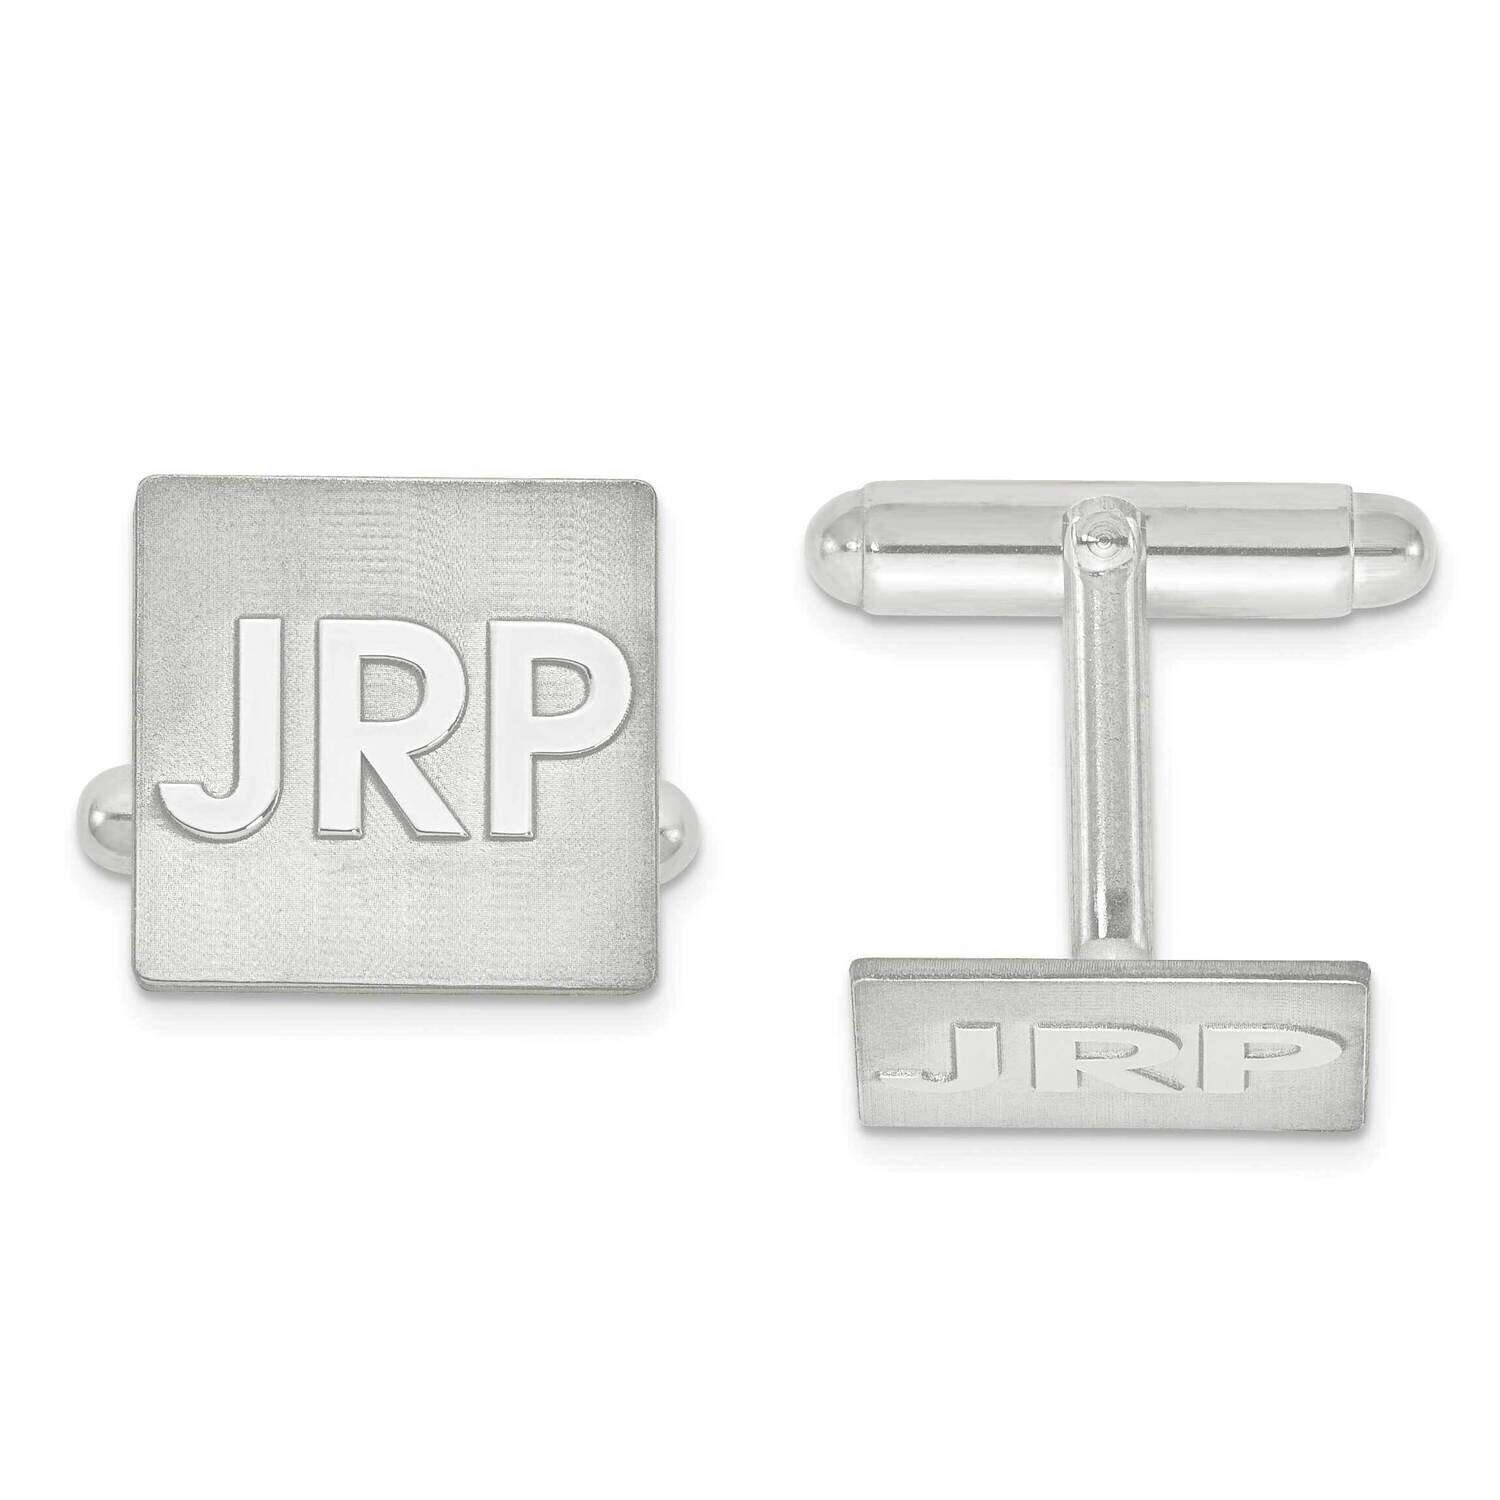 Raised Letters Square Monogram Cuff Links 14k White Gold XNA612W